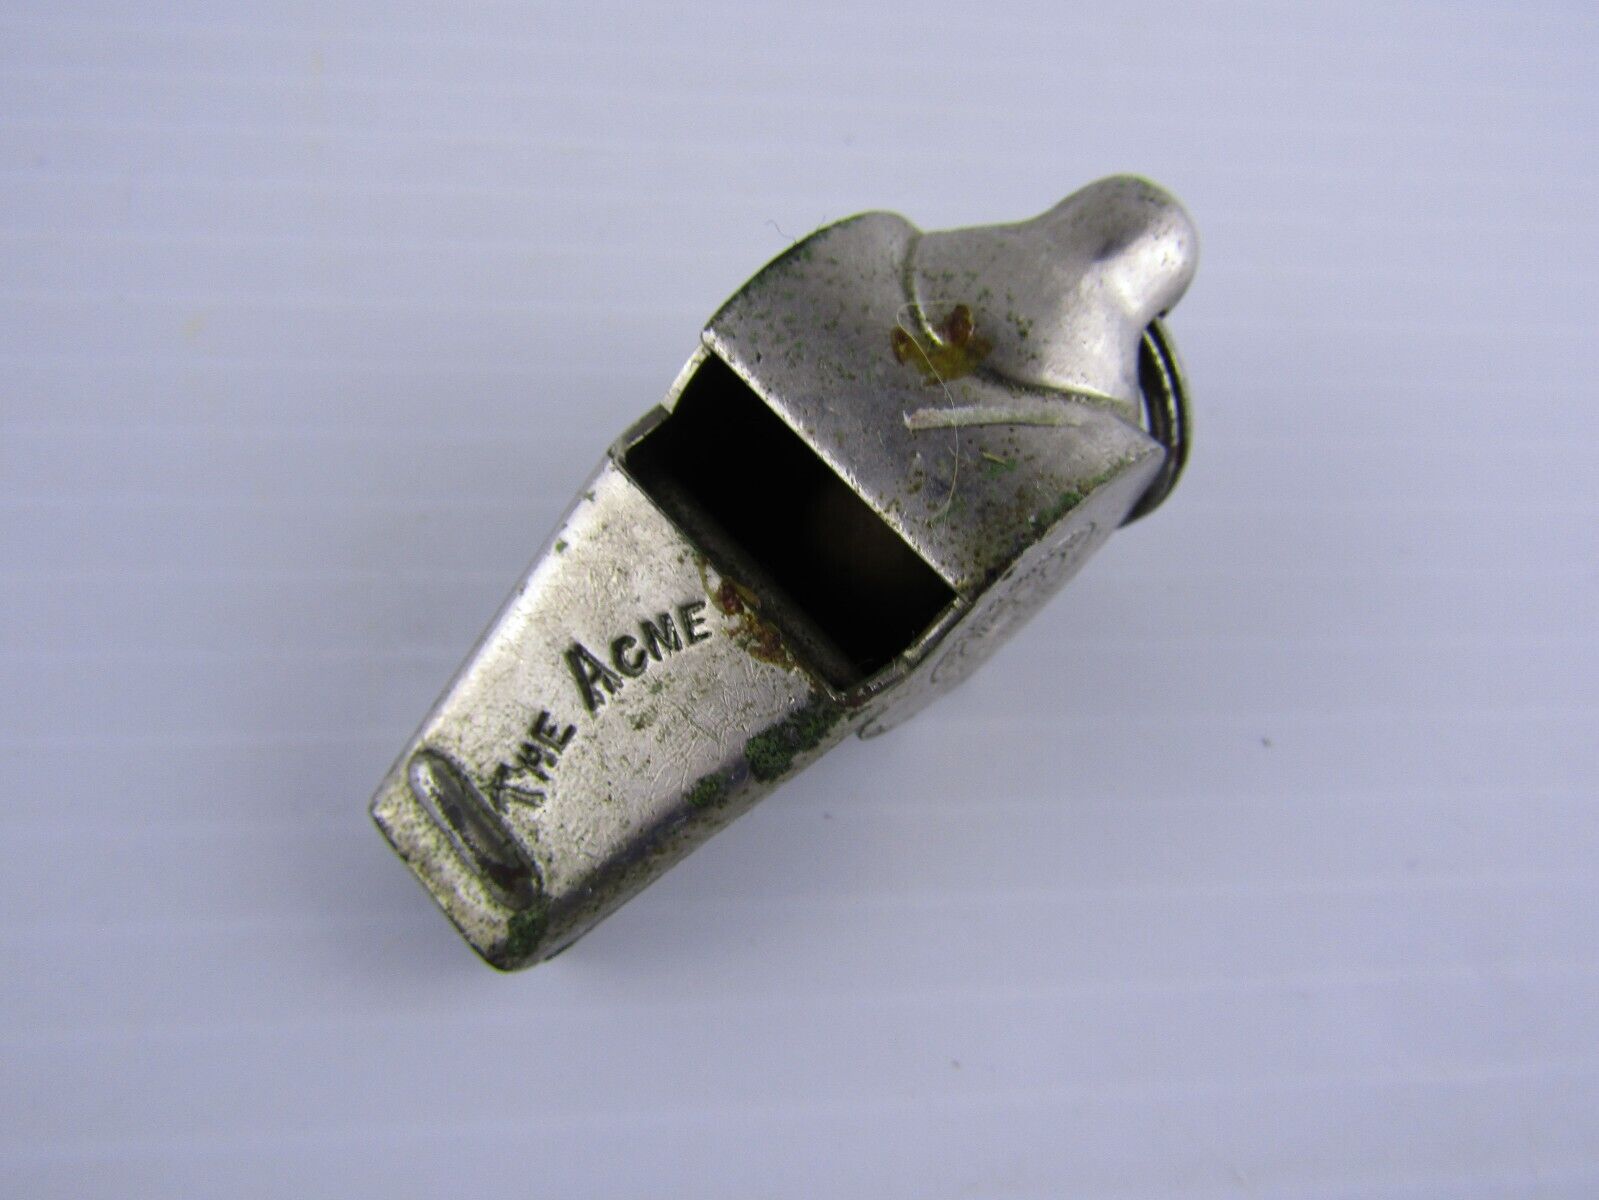 Vintage Acme Thunderer Whistle Nickel Plated Brass, Alex Taylor Co. England, NY